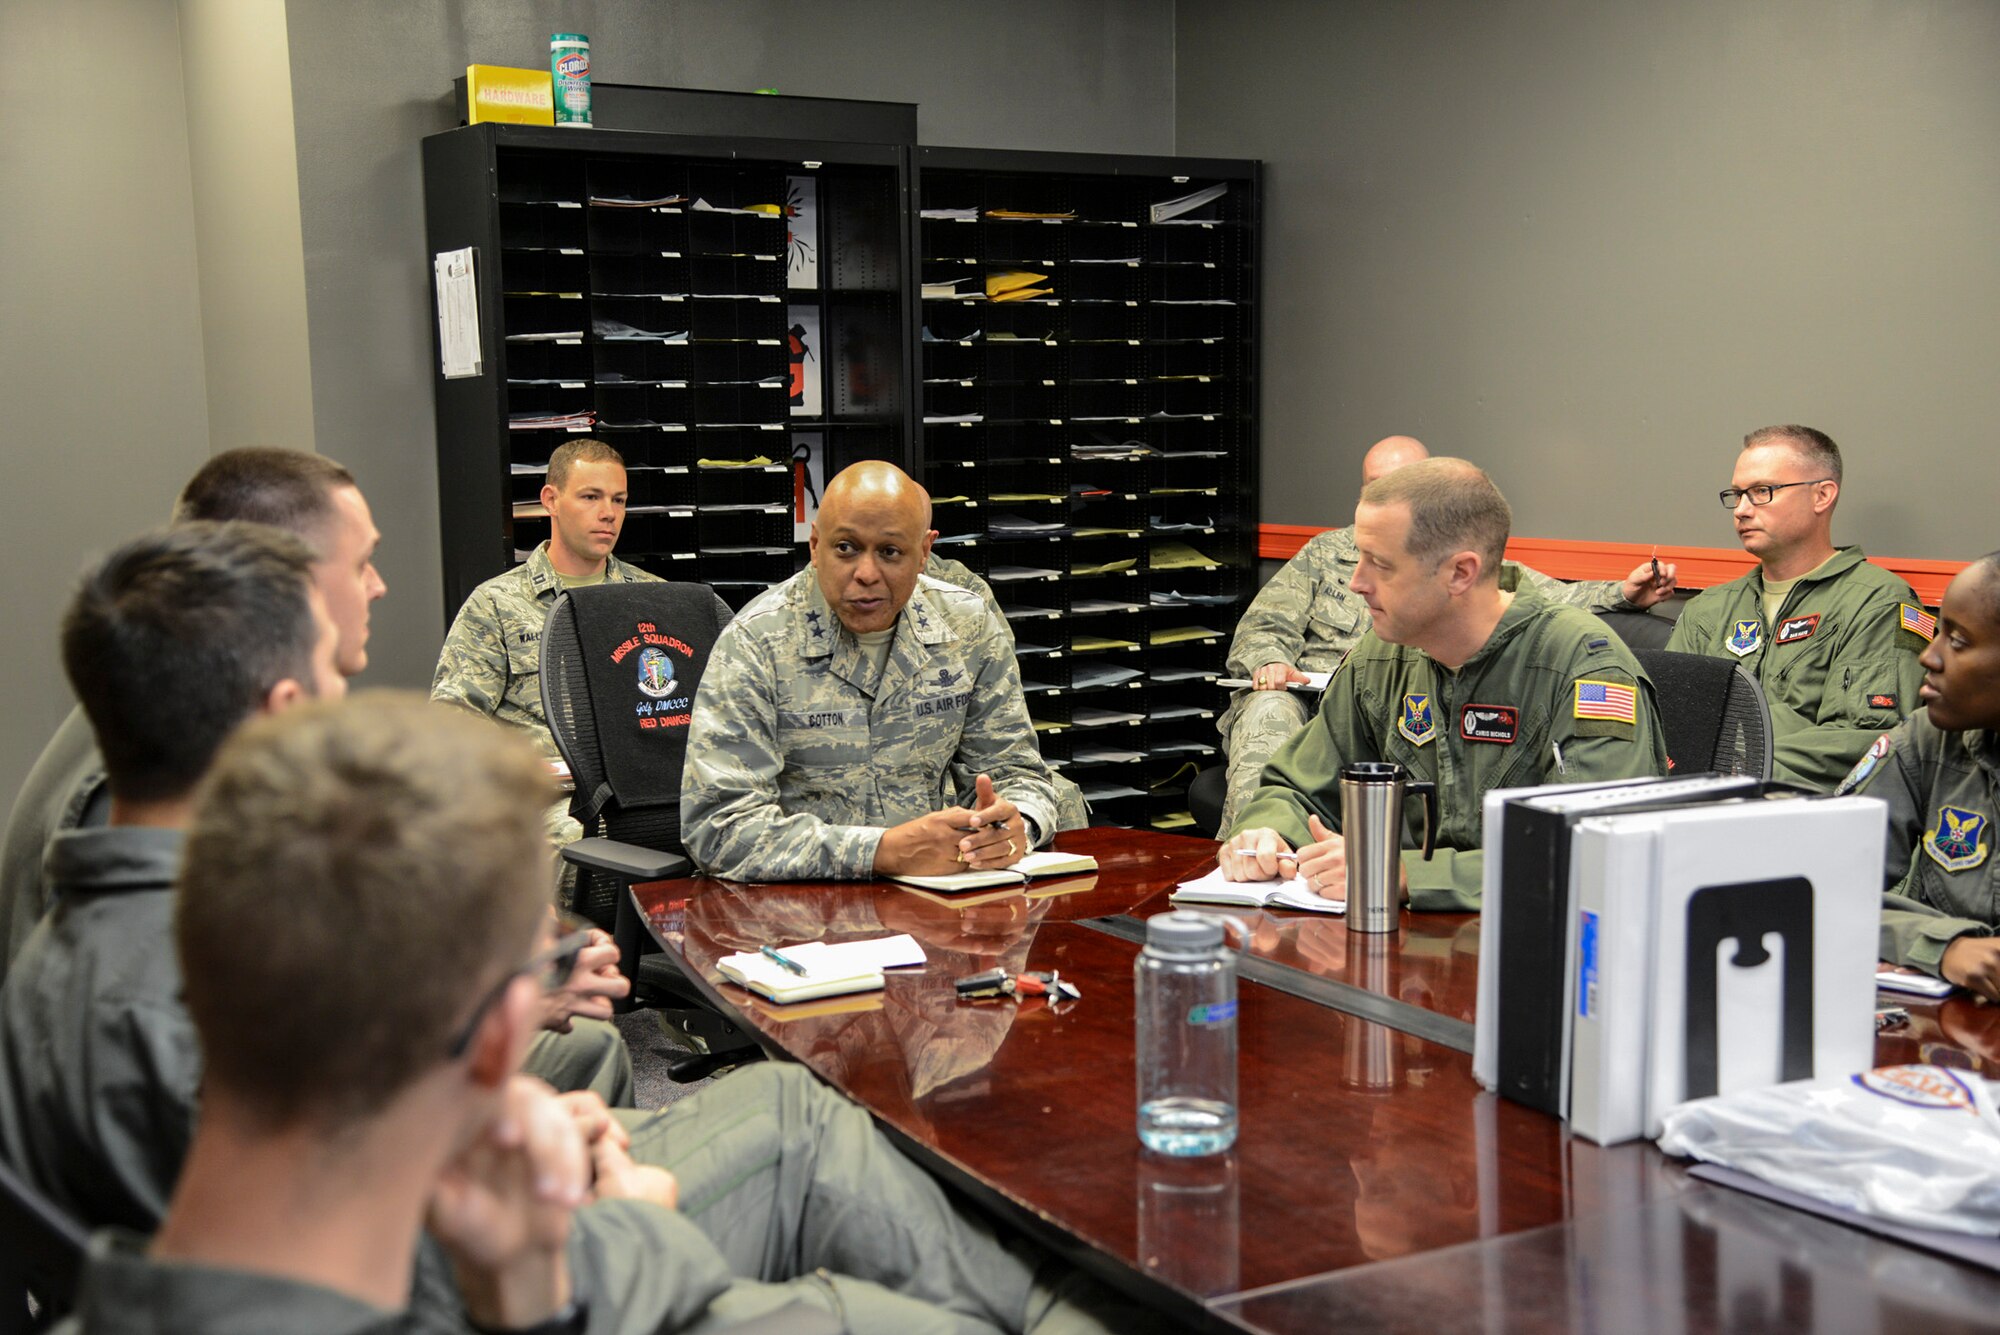 Maj. Gen. Anthony Cotton, 20th Air Force commander, attends a 12th Missile Squadron mission planning brief, Oct. 11, 2017 at Malmstrom Air Force Base, Mont.